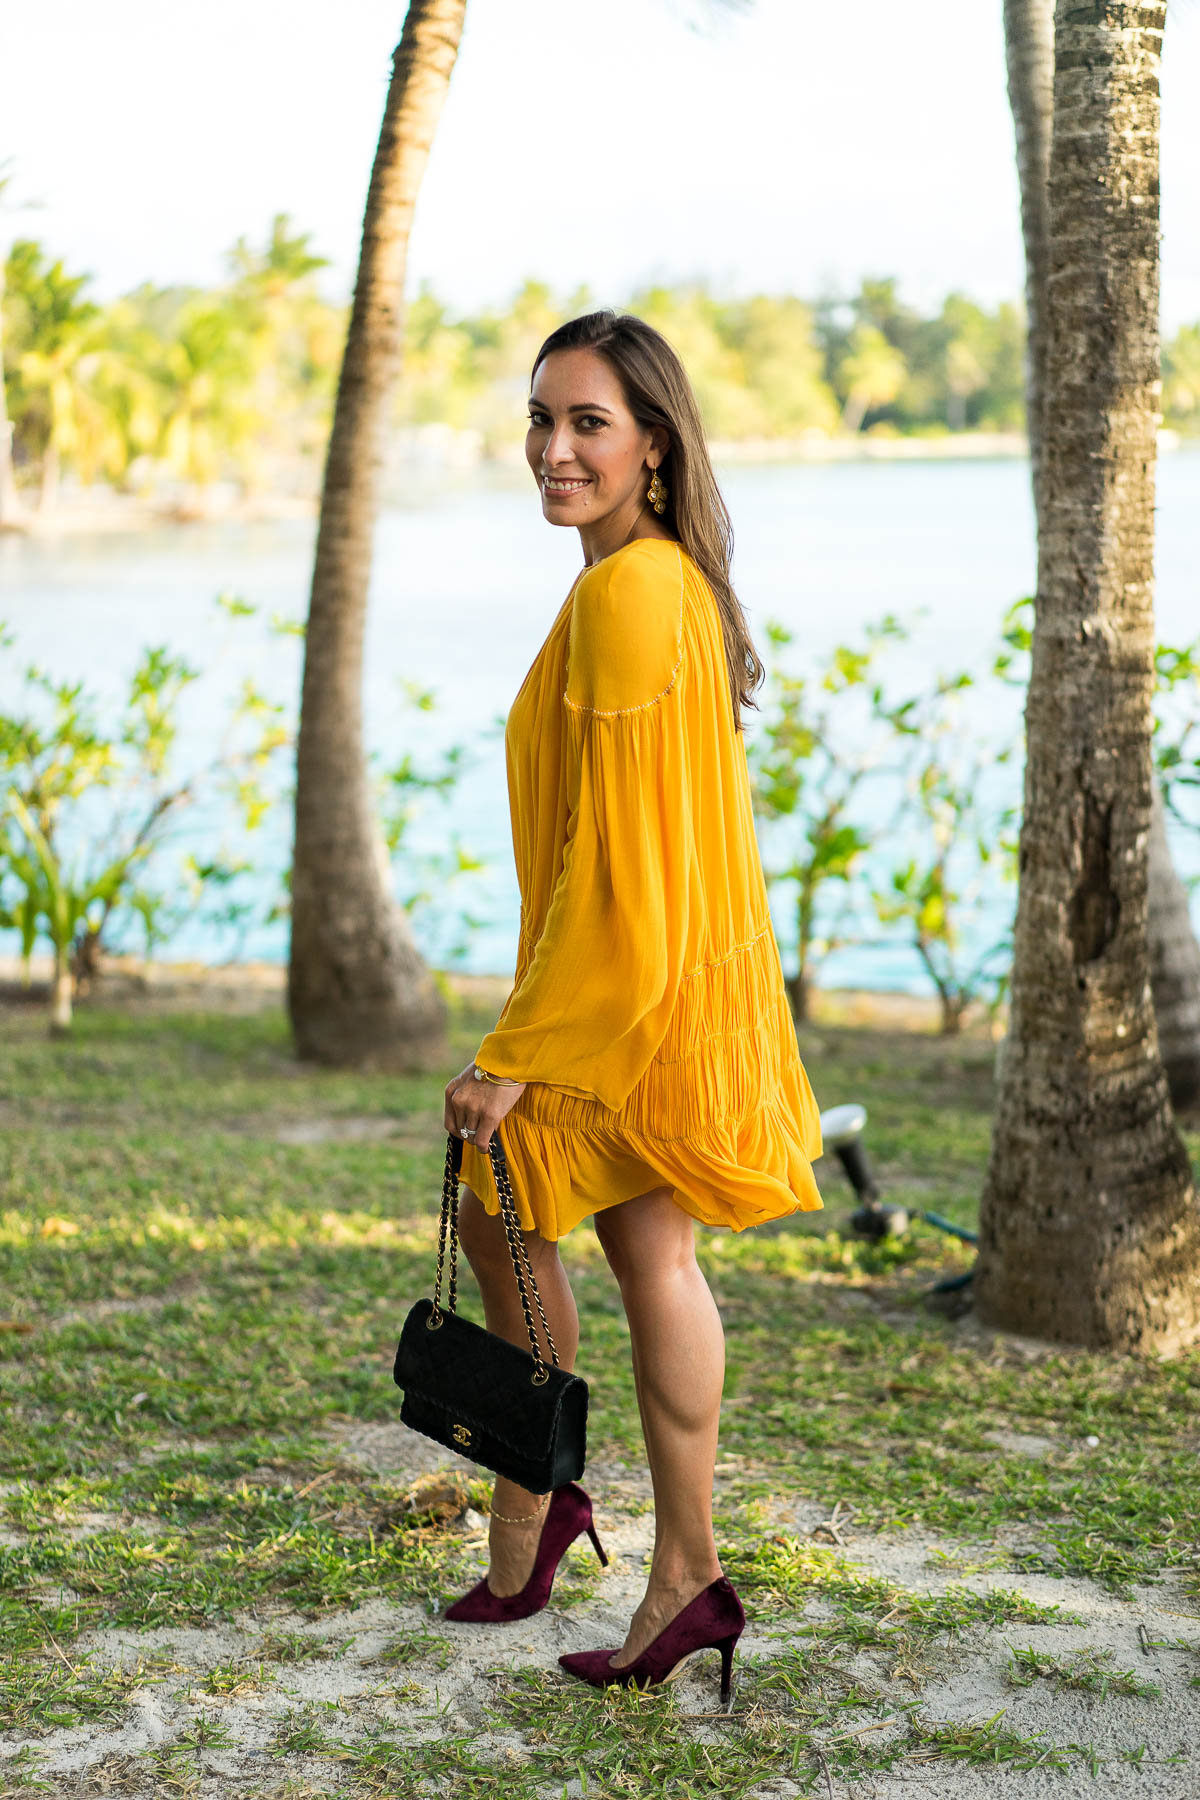 Learn how to style a mustard yellow dress by South Florida fashion blogger Amanda from A Glam Lifestyle